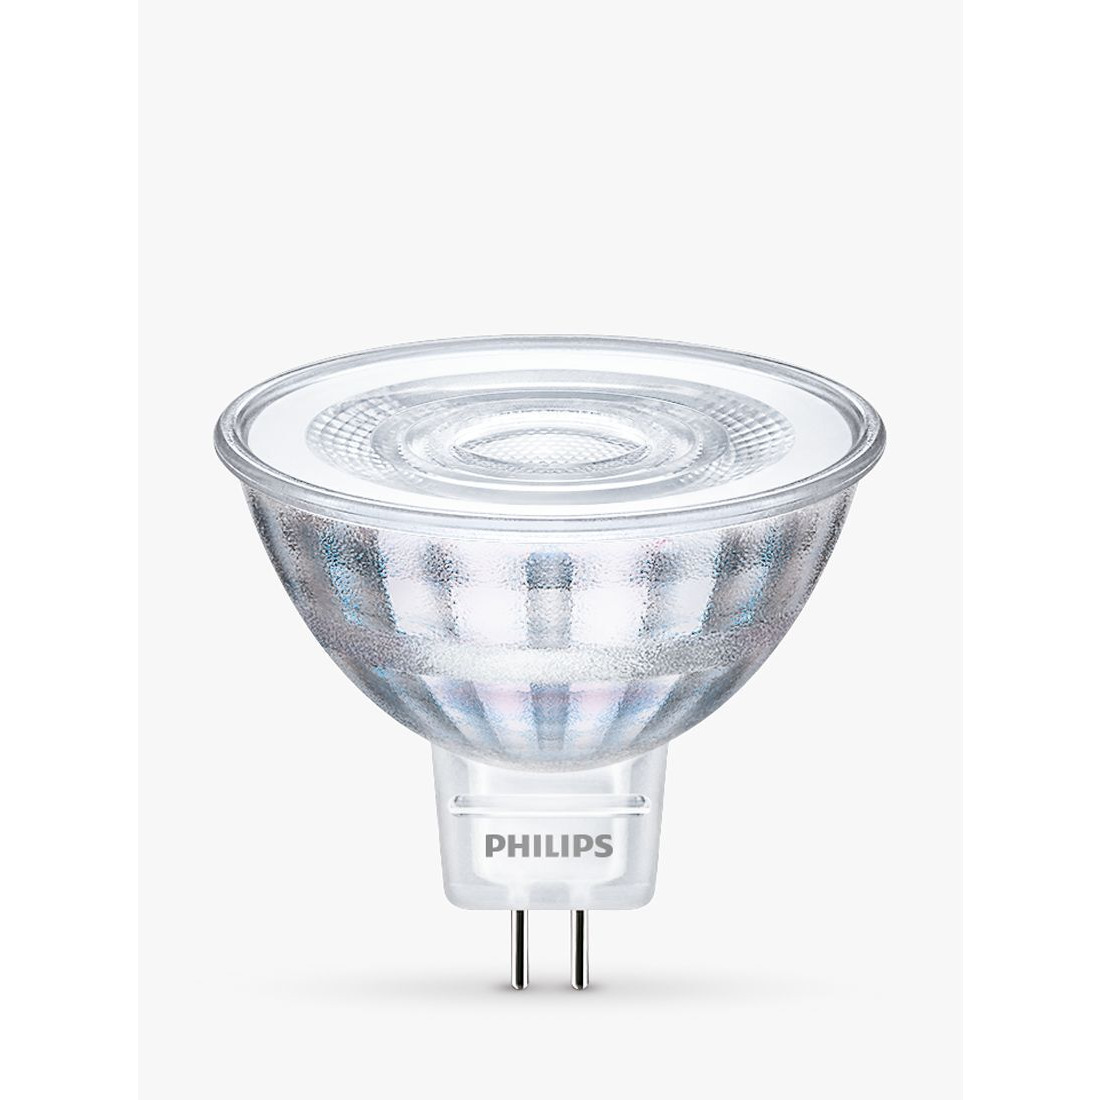 Philips 5W MR16 LED Non-Dimmable Spotlights, Pack of 2, White - image 1